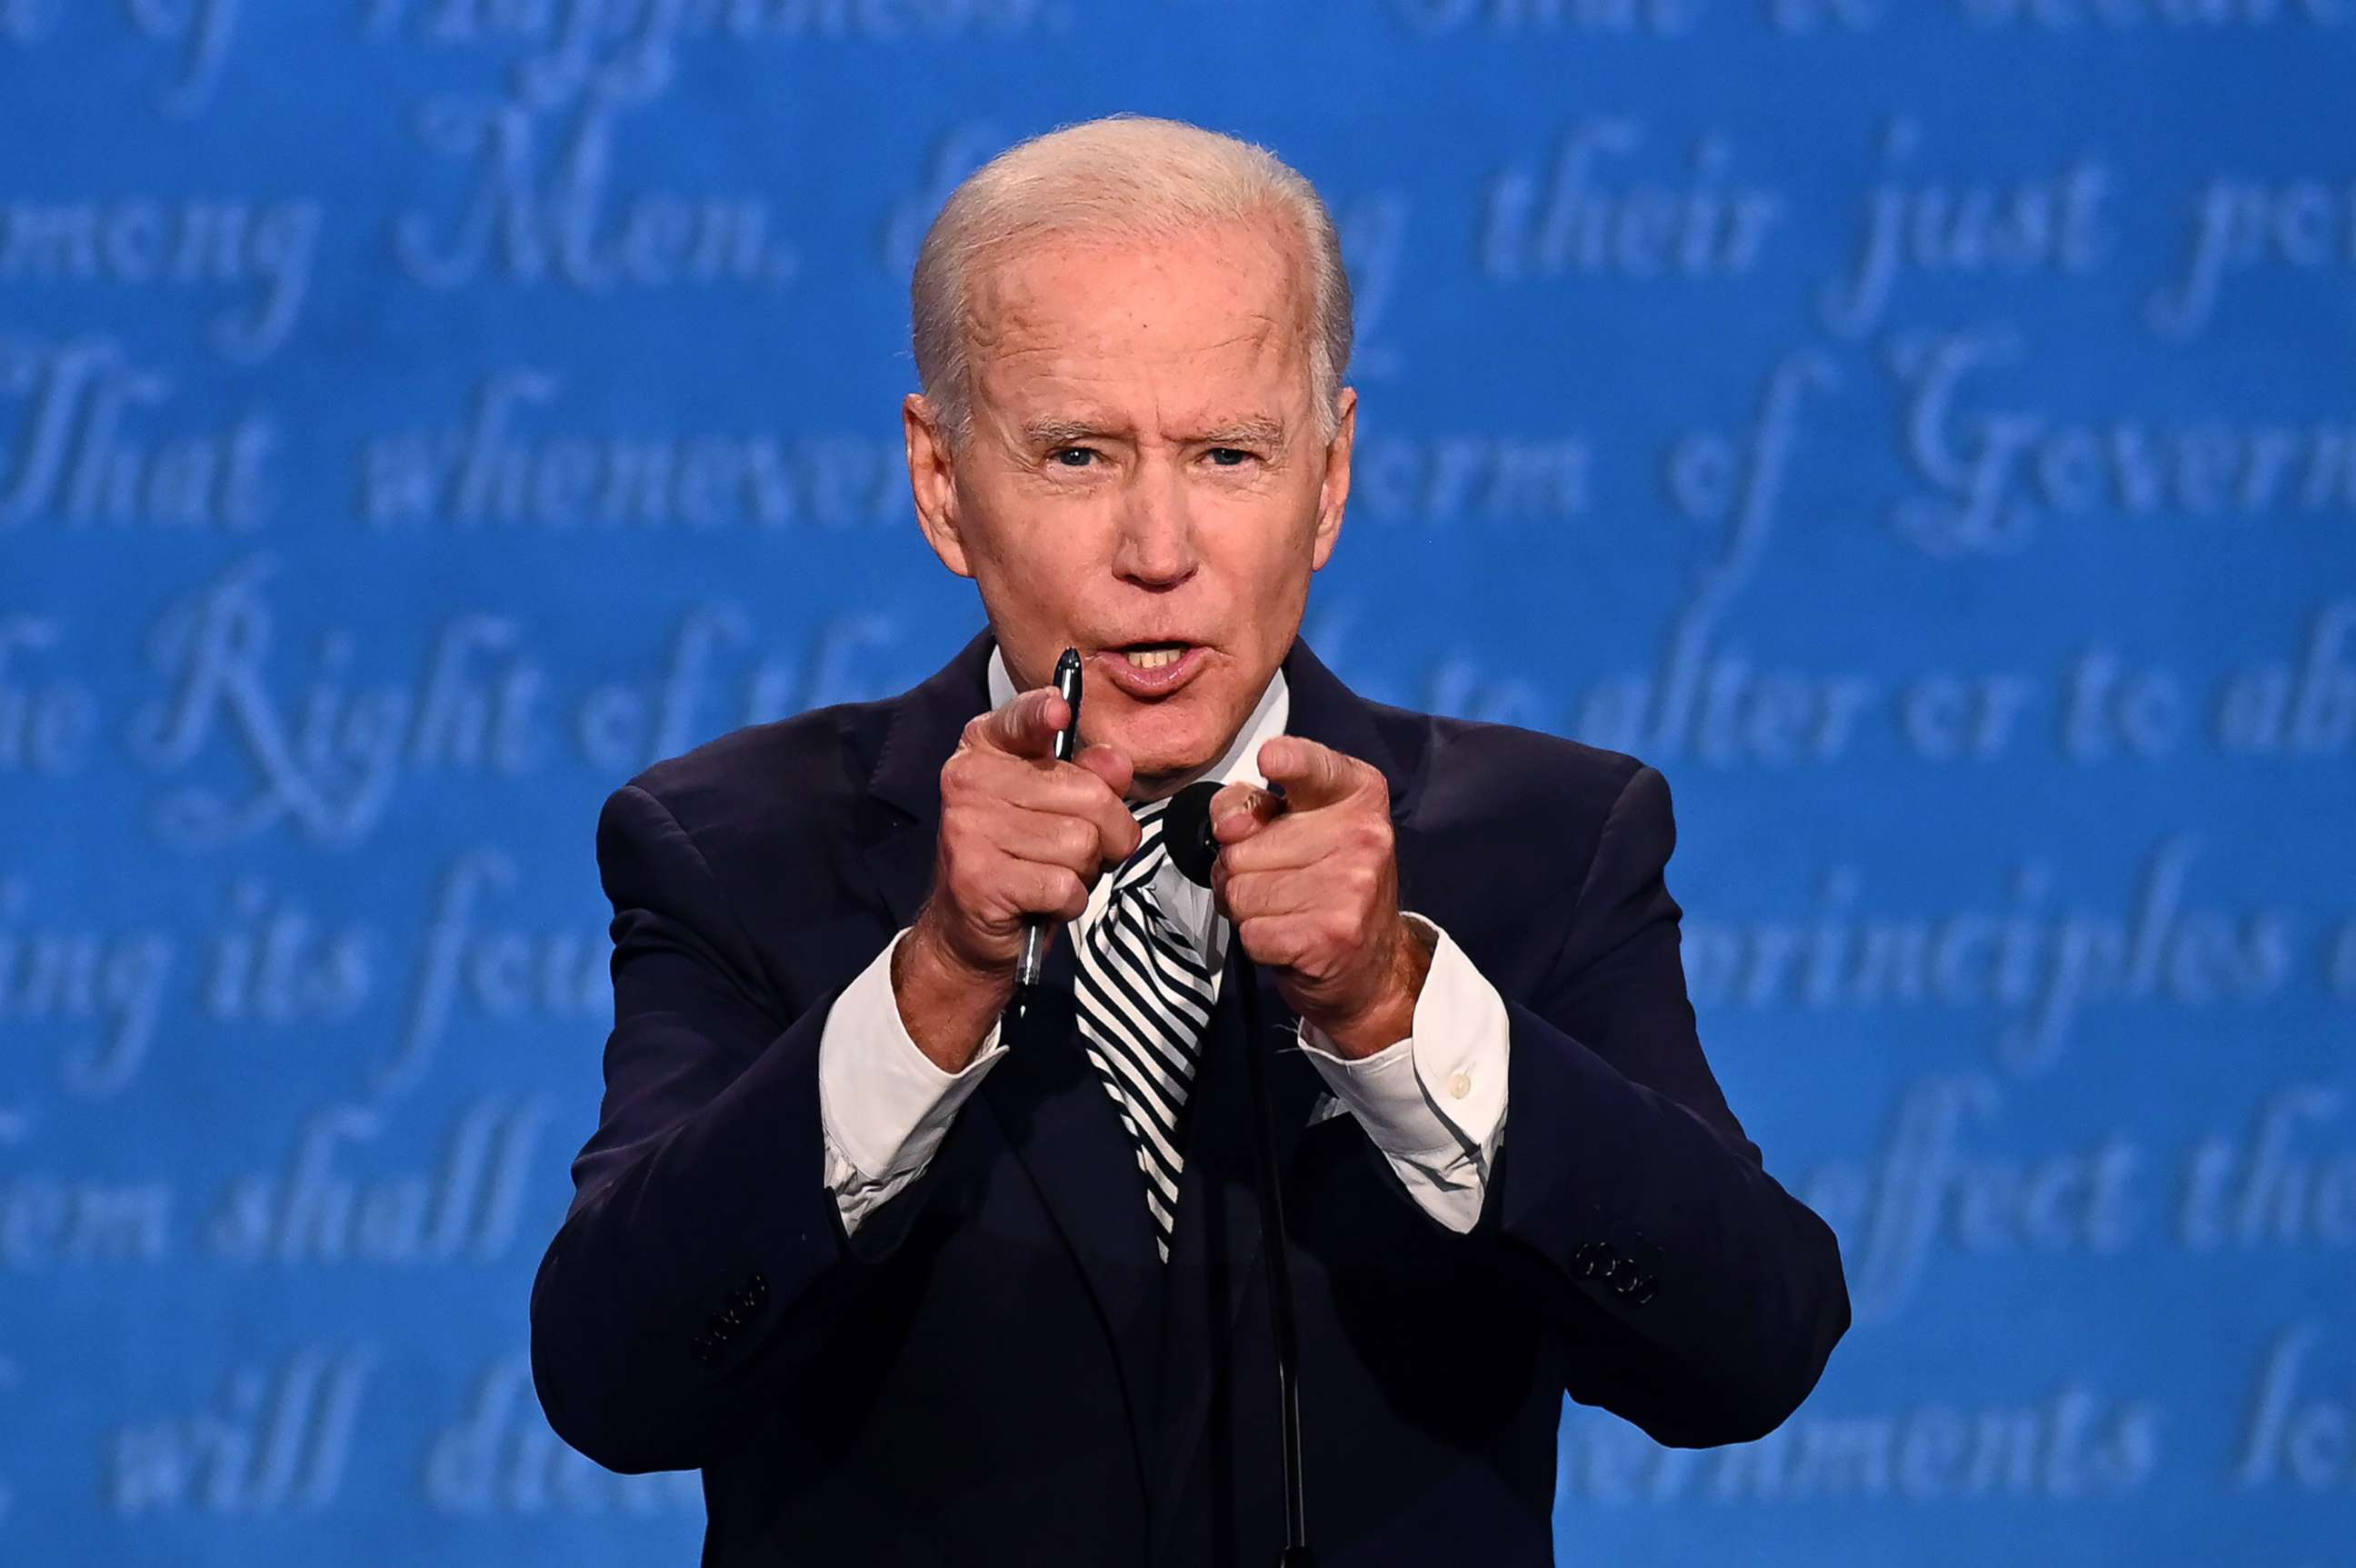 PHOTO: Democratic Presidential candidate and former US Vice President Joe Biden speaks during the first presidential debate in Cleveland, Sept. 29, 2020.